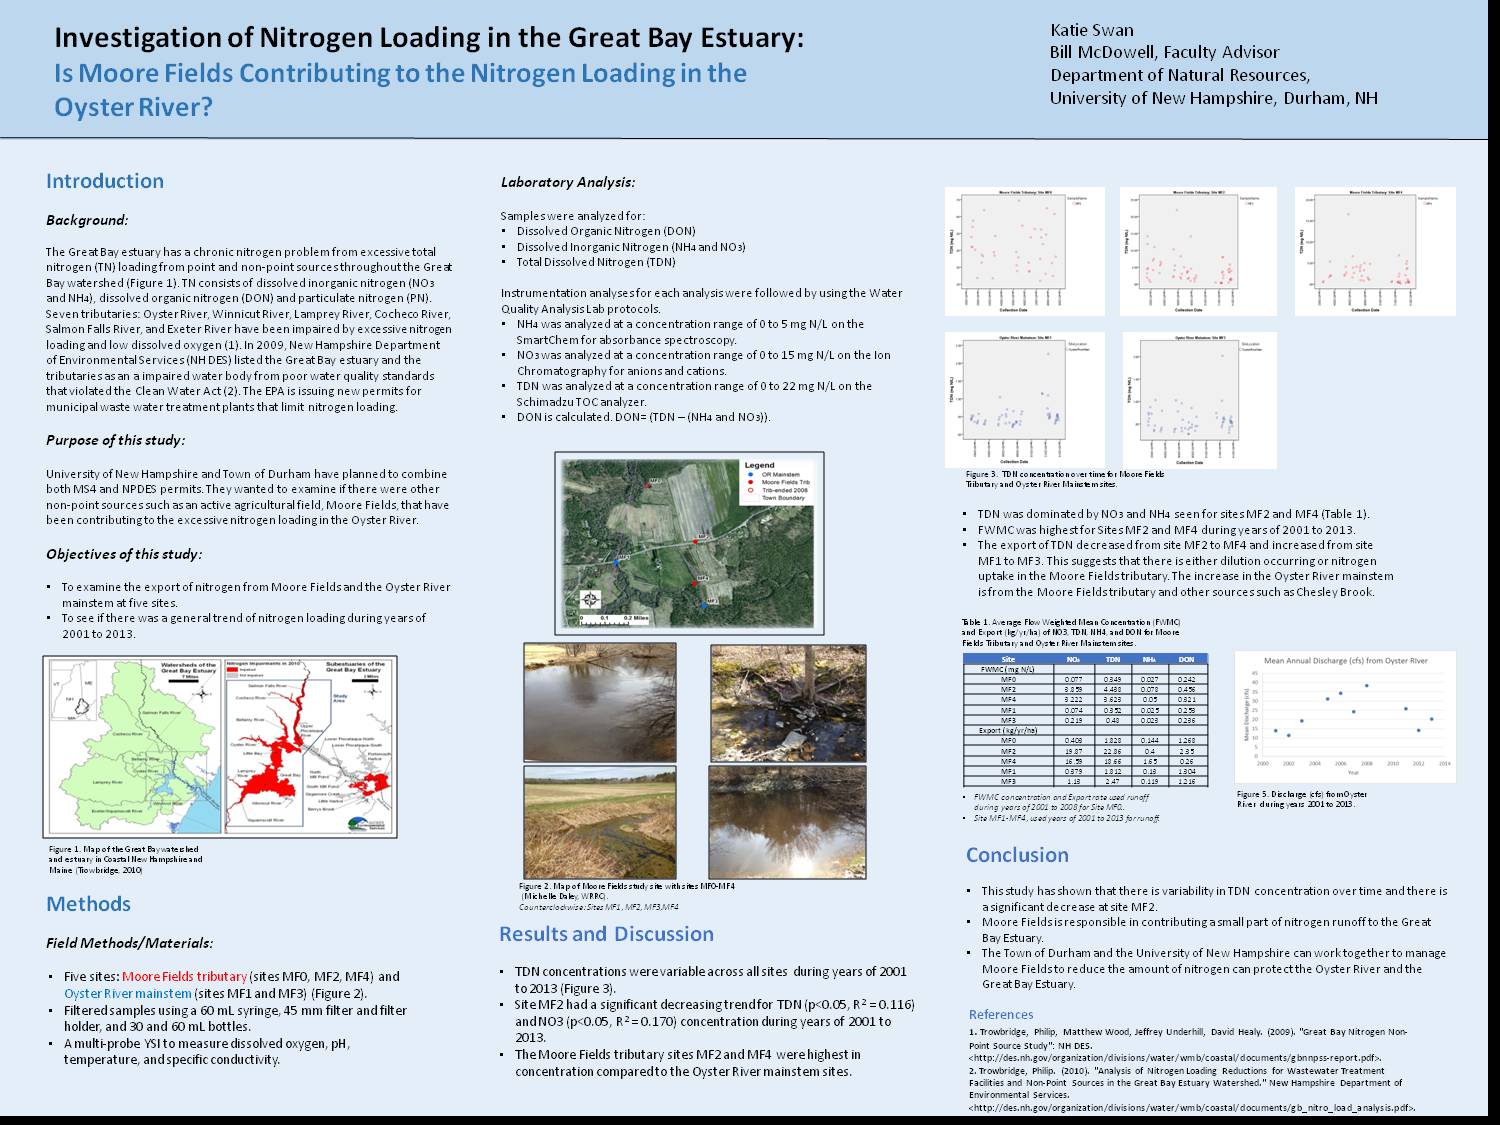 Investigation Of Nitrogen Loading In The Great Bay Estuary: Is Moore Fields Contributing To The Nitrogen Loading In The Oyster River? by knm23